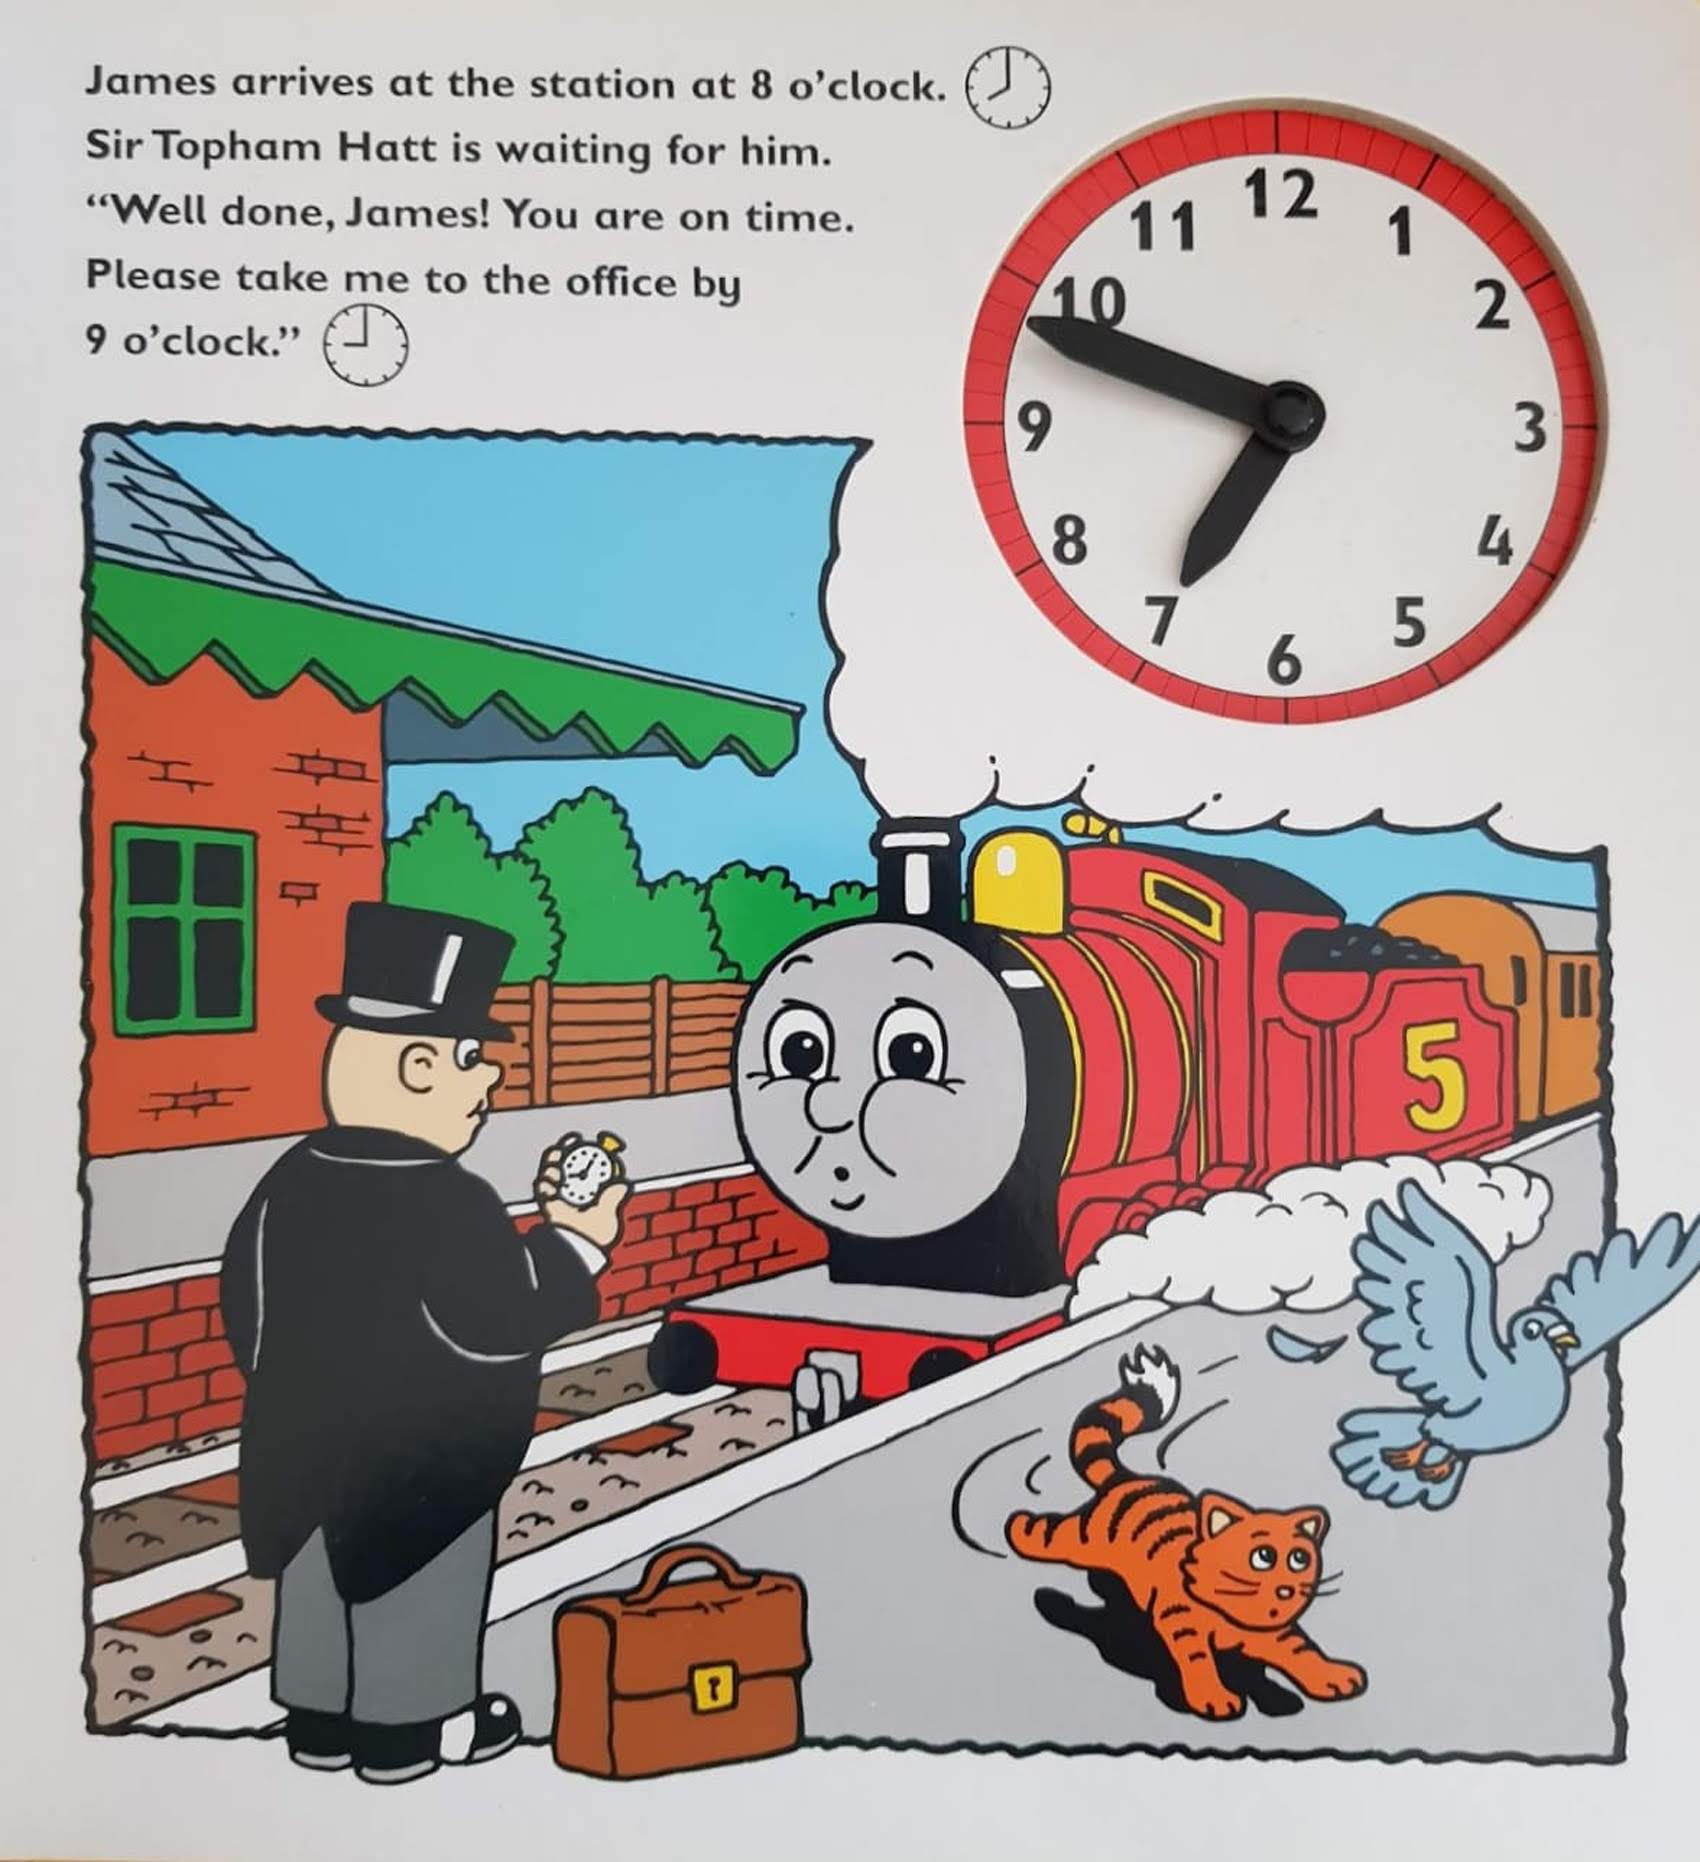 Tell the Time With THOMAS Like New Thomas & Friends  (6203873132729)